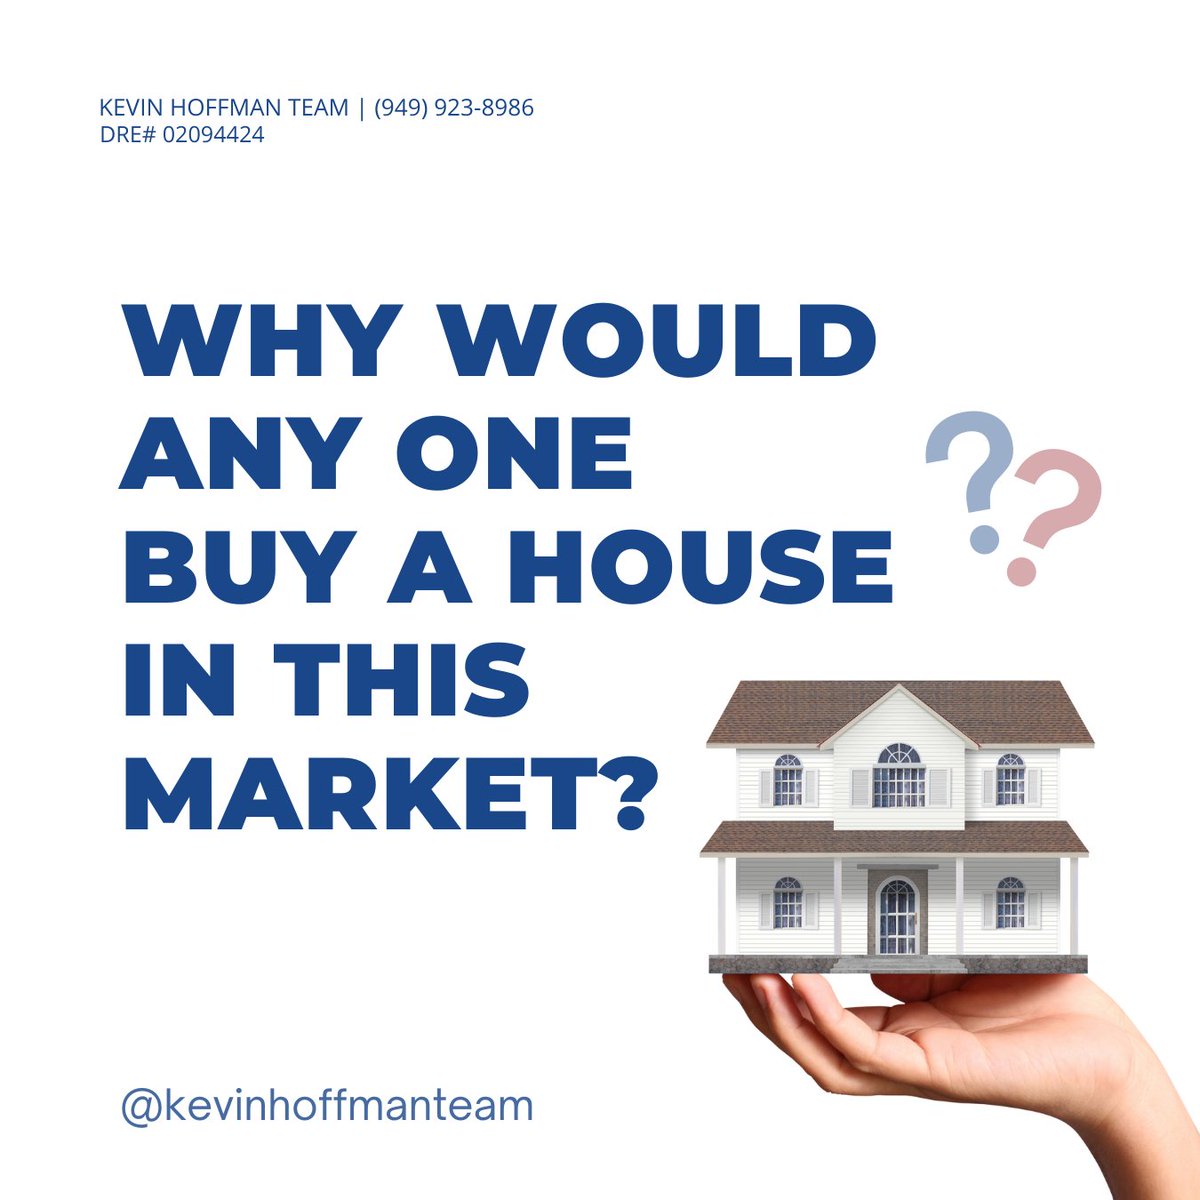 Here's why now might be the perfect time to invest in your future:

☑️ Builder & Seller Credits
☑️ Rate Buy Downs
☑️ Less Competition:
☑️ Stable Prices: 

Have questions? DM me today! 

Kevin Hoffman | DRE #02094424
📲 (949) 923-8986

#housingmarket #OrangeCountyRealtor